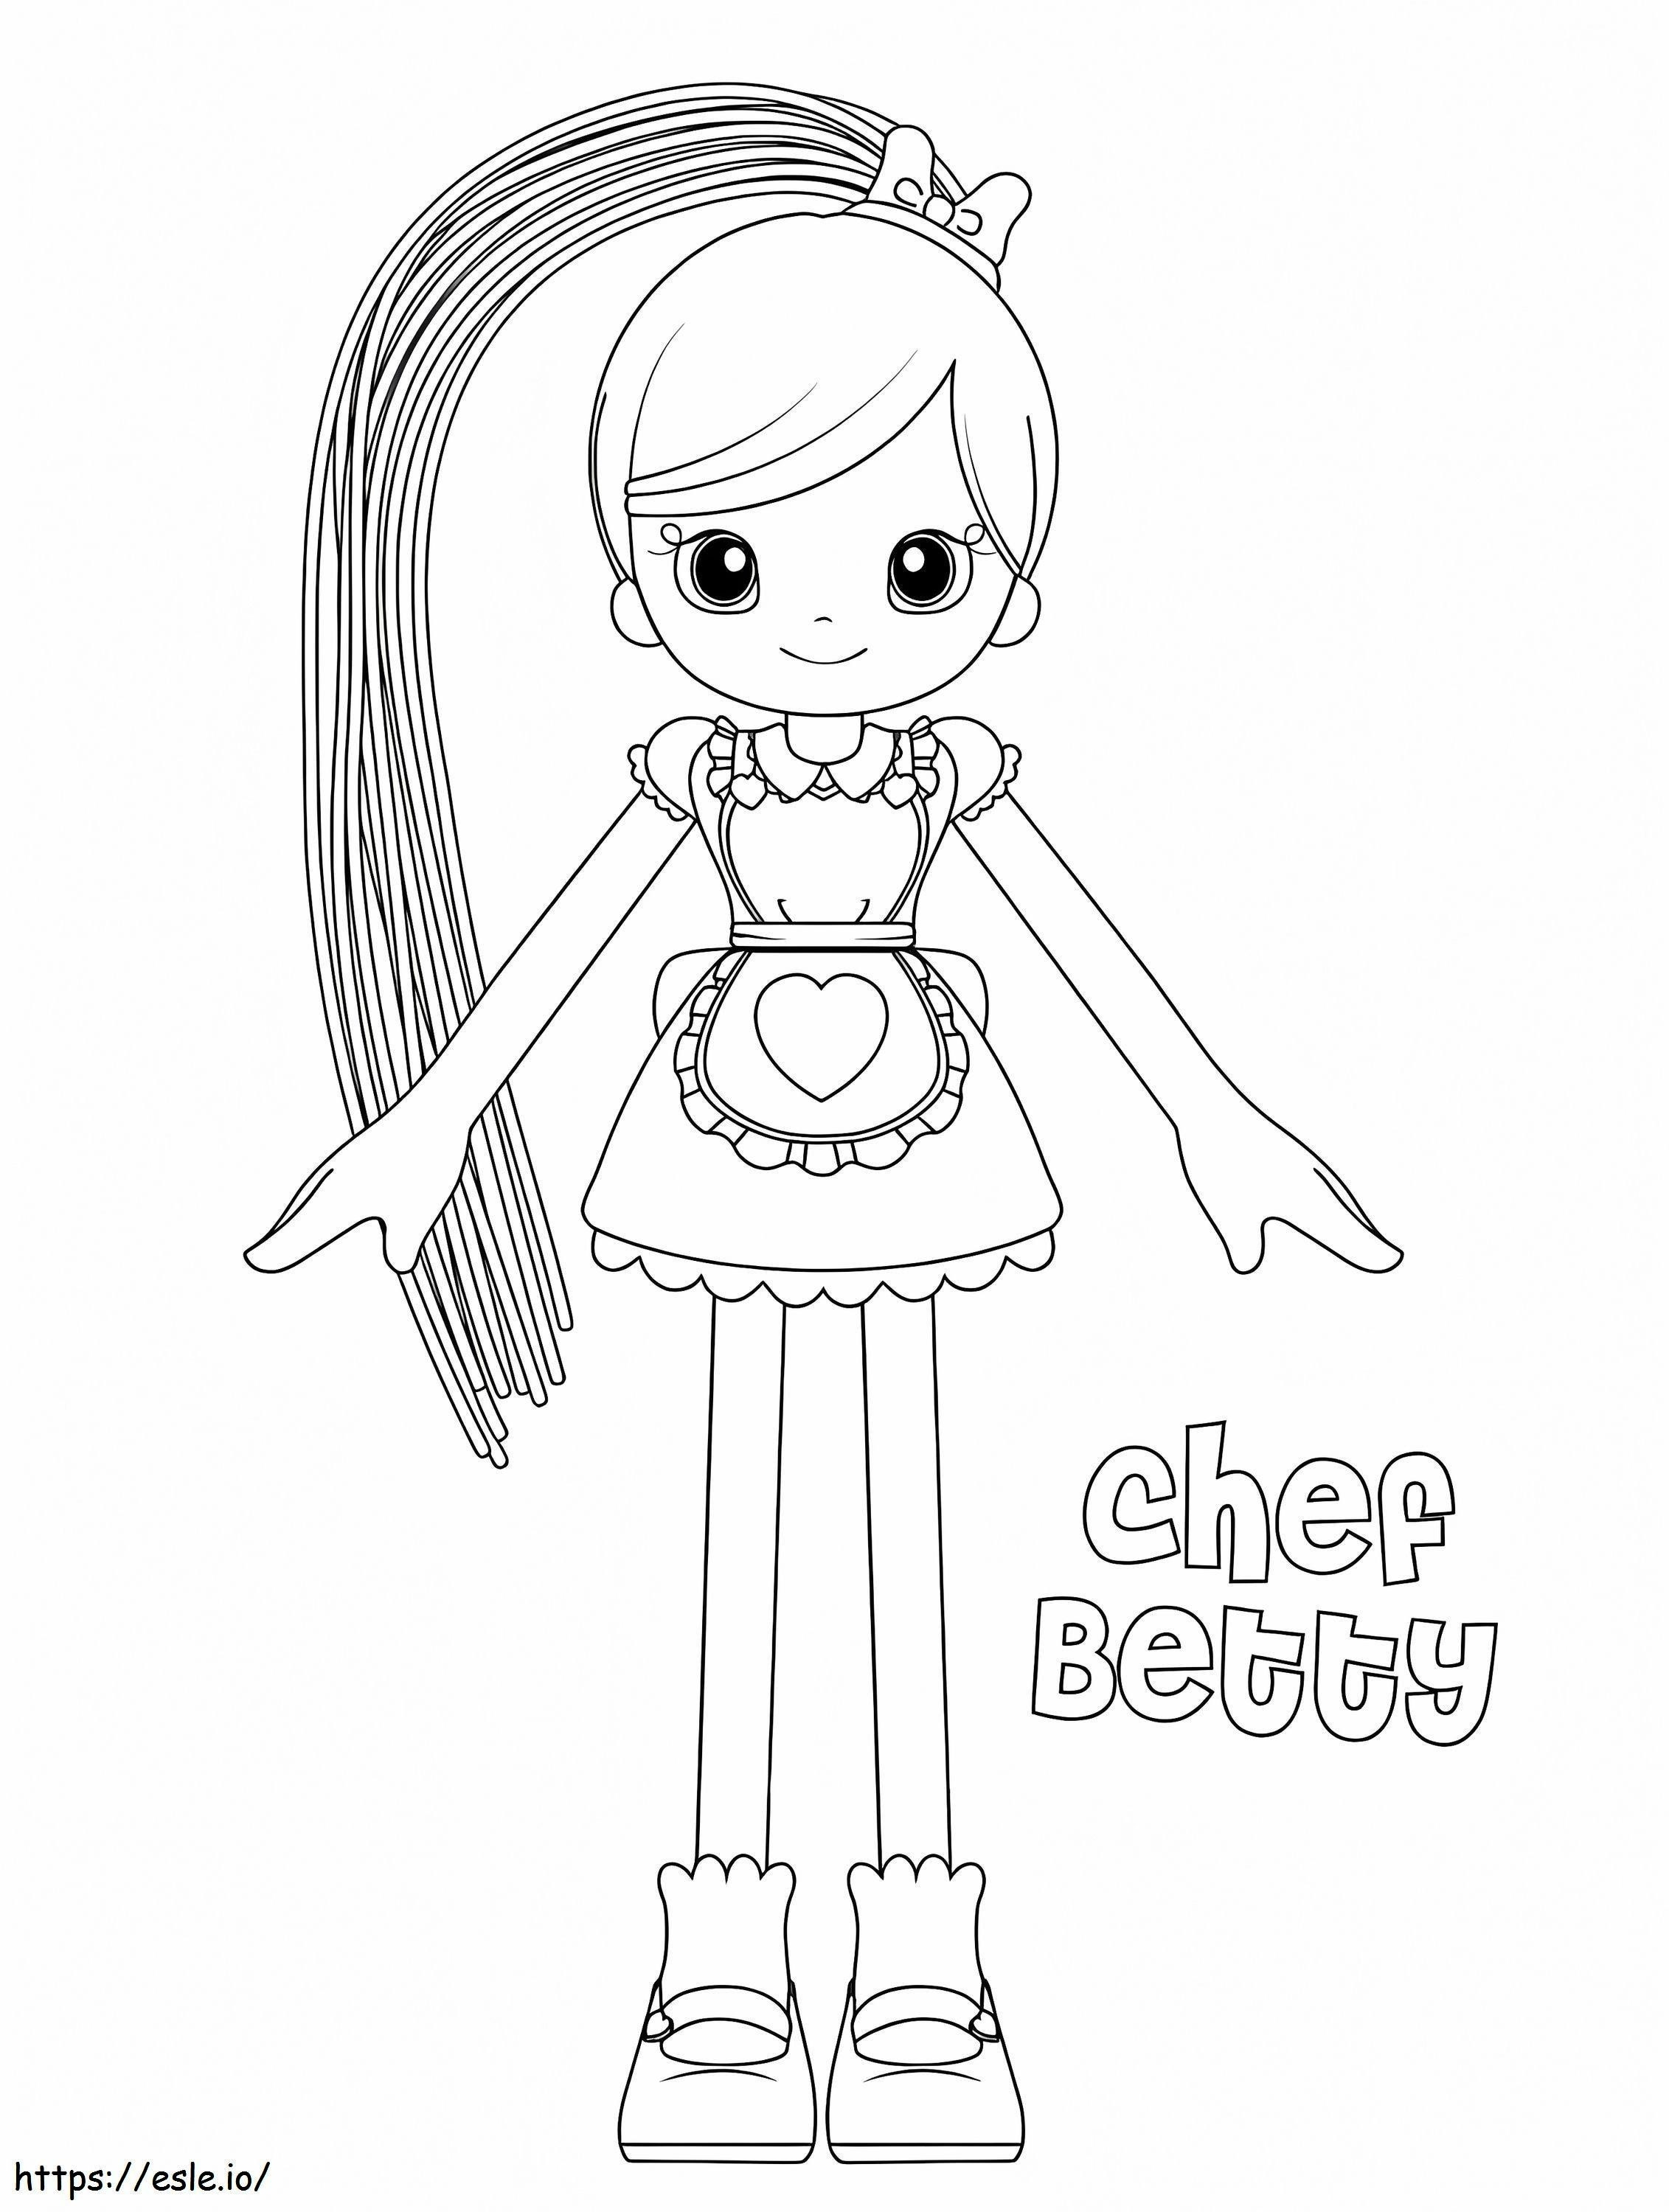 Chef Betty coloring page